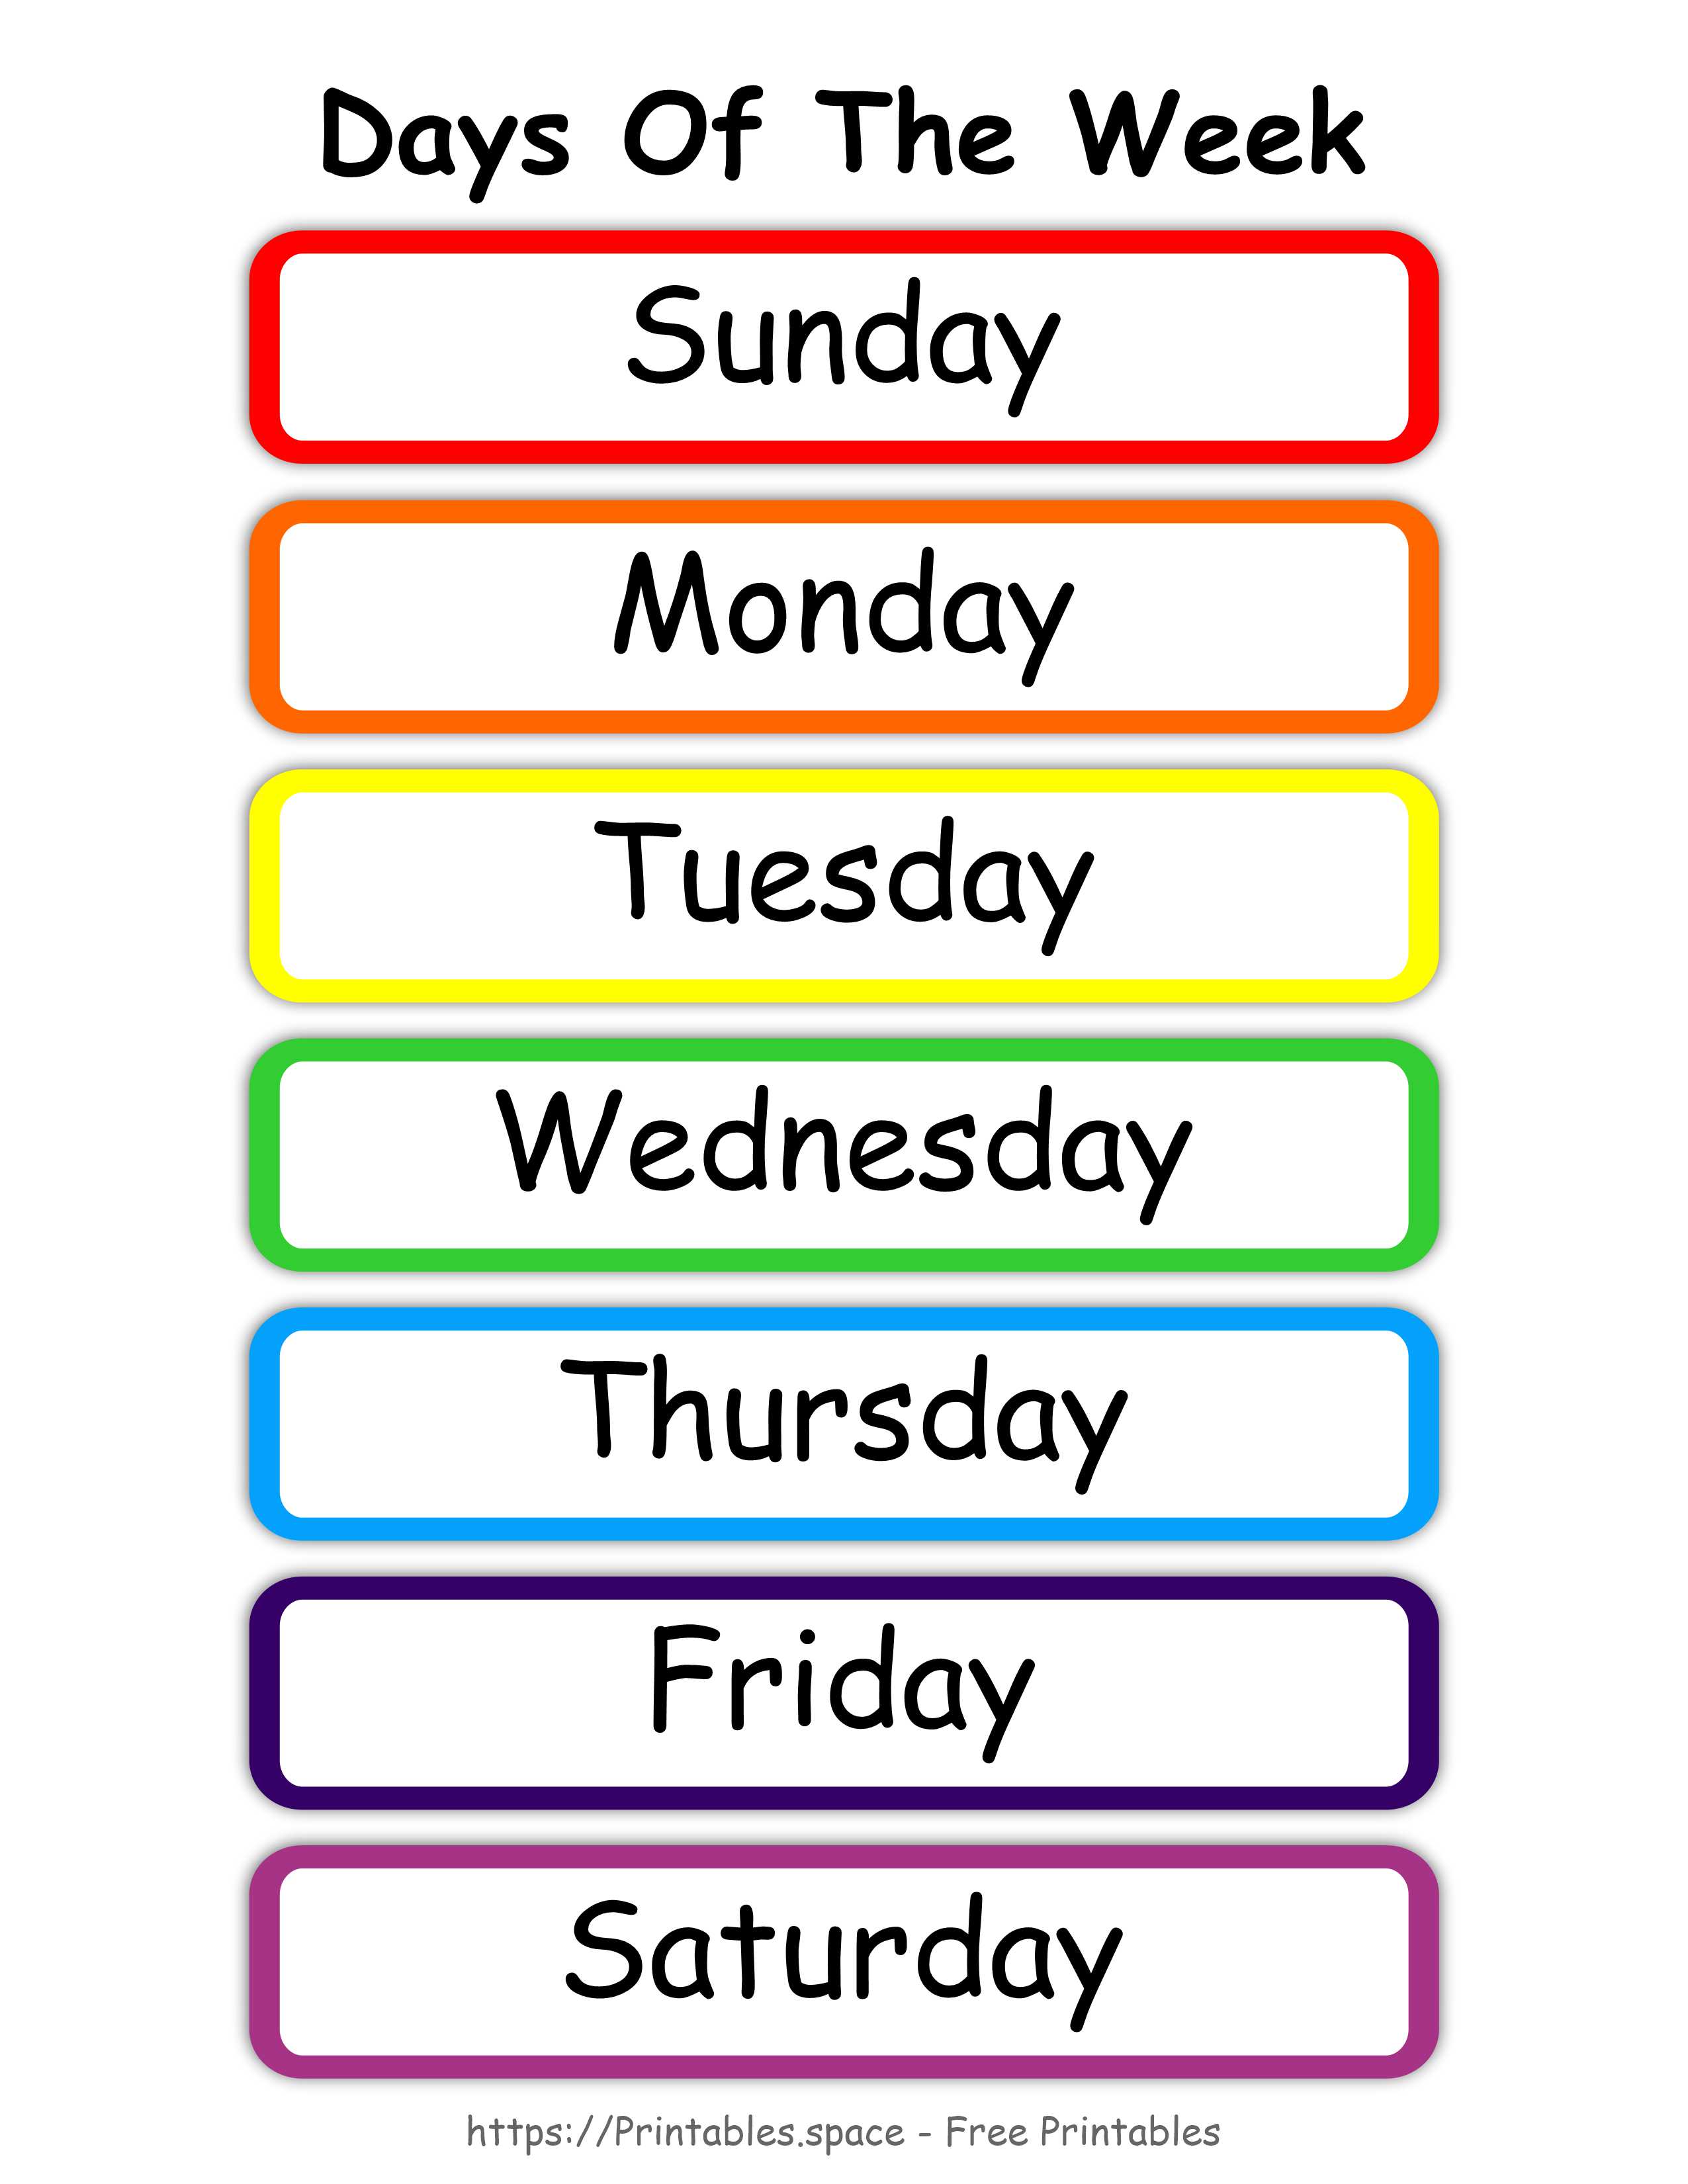 days-of-the-week-chart-jpeg-new